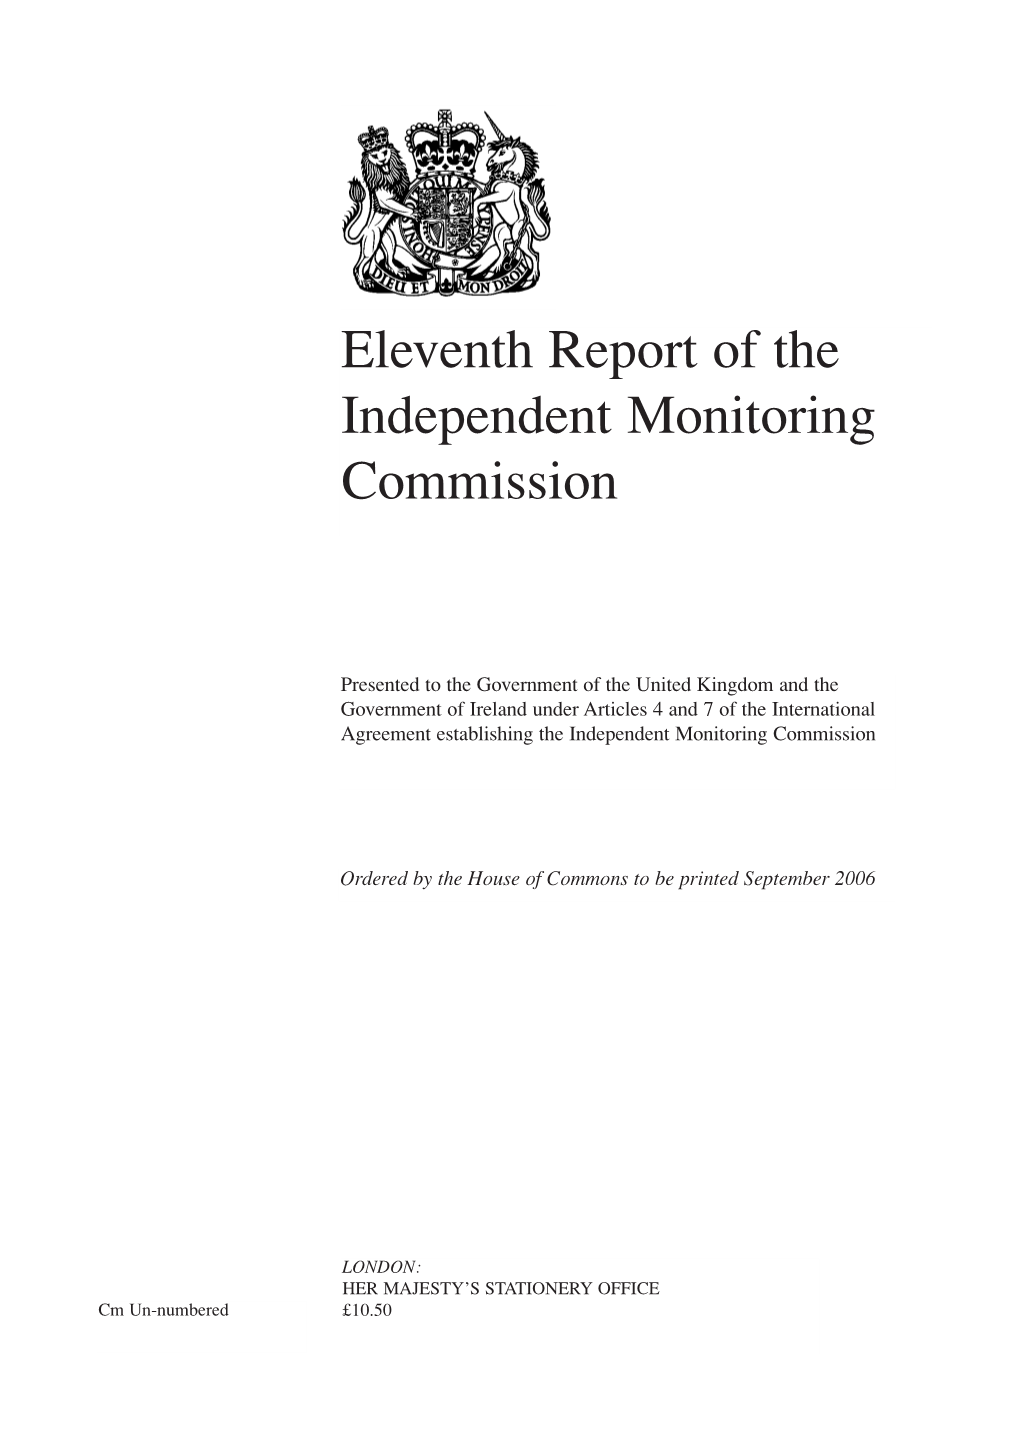 Eleventh Report of the Independent Monitoring Commission CM Un-Numbered